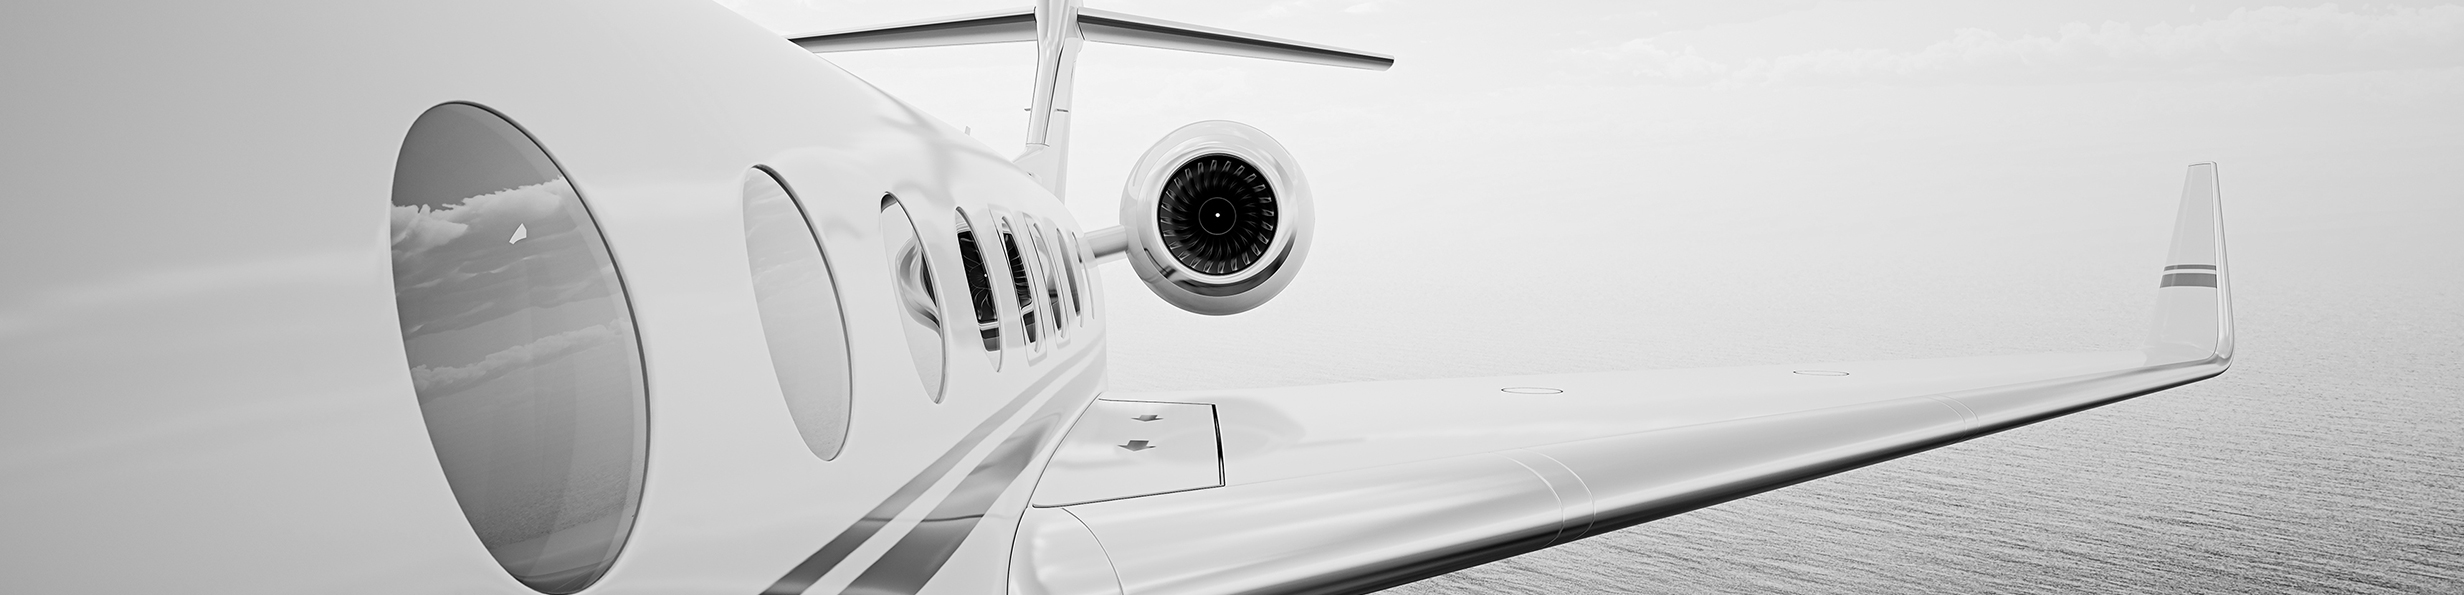 charter jet quote, rent a jet quote, how much is a private plane?